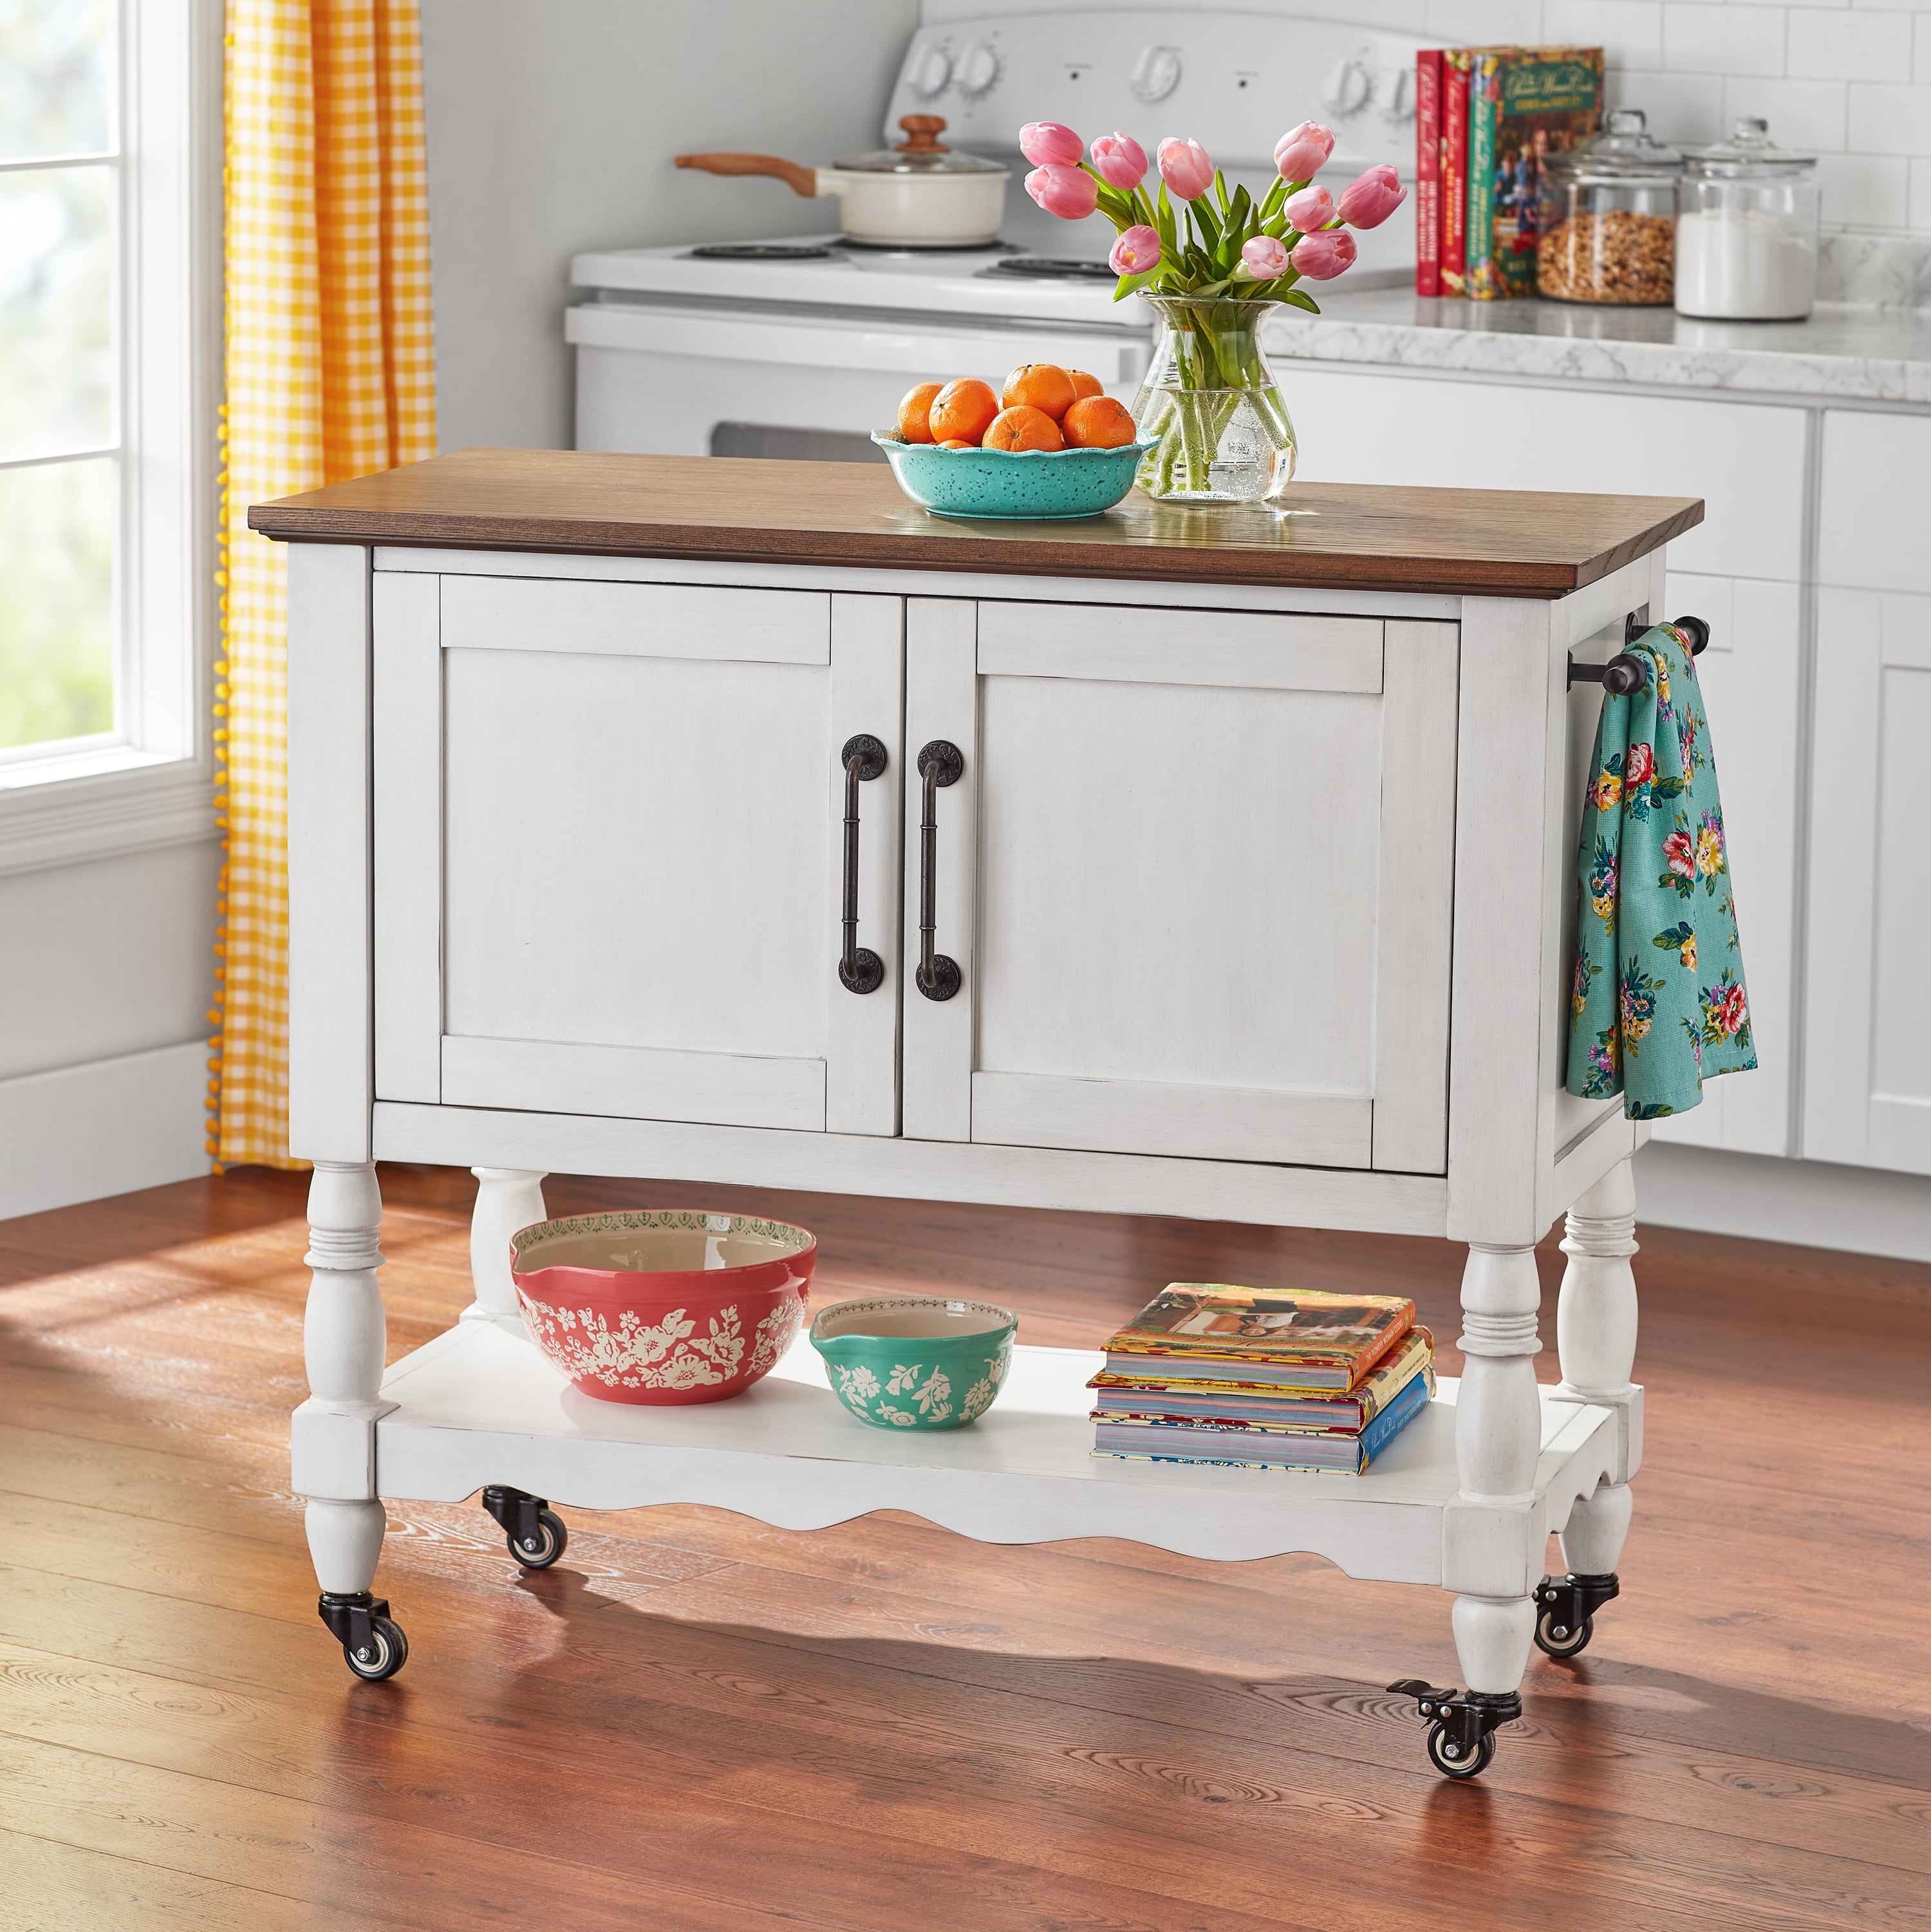 Pioneer Woman's $15 Vintage-Inspired Storage Set Is the 'Big, Bold, &  Beautiful' Addition That'll Work in Any Kitchen